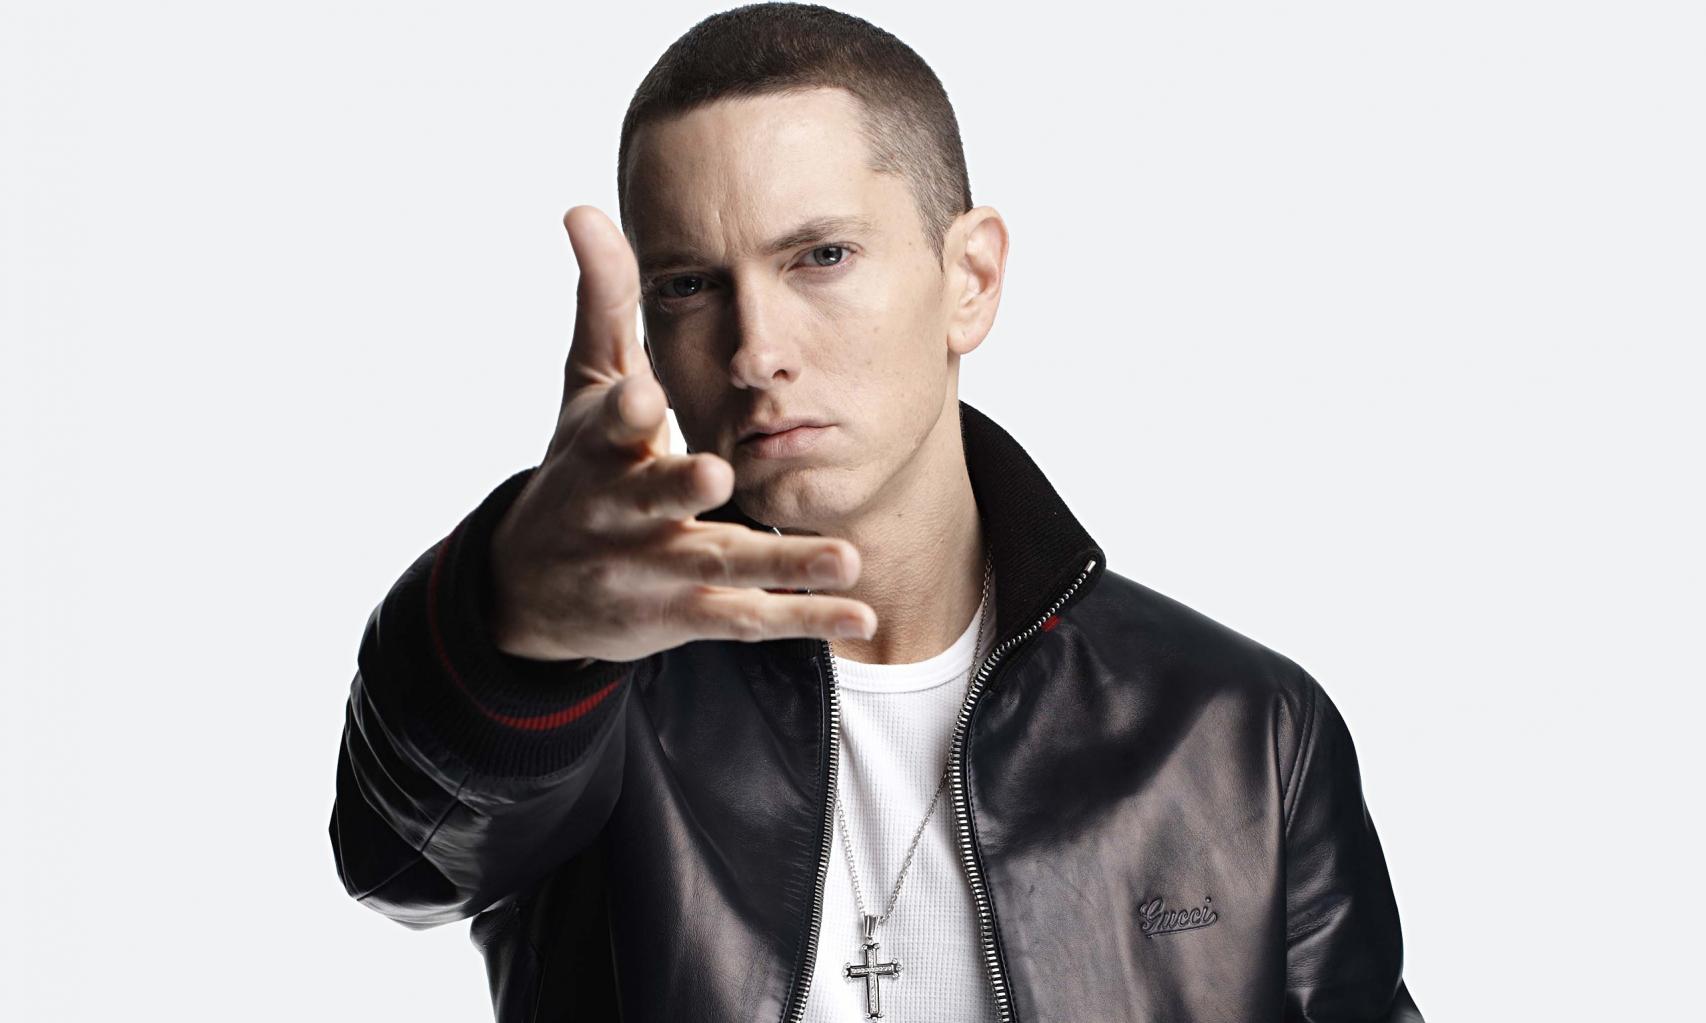 What Happened To Eminem? What Is He Doing Now In 2016